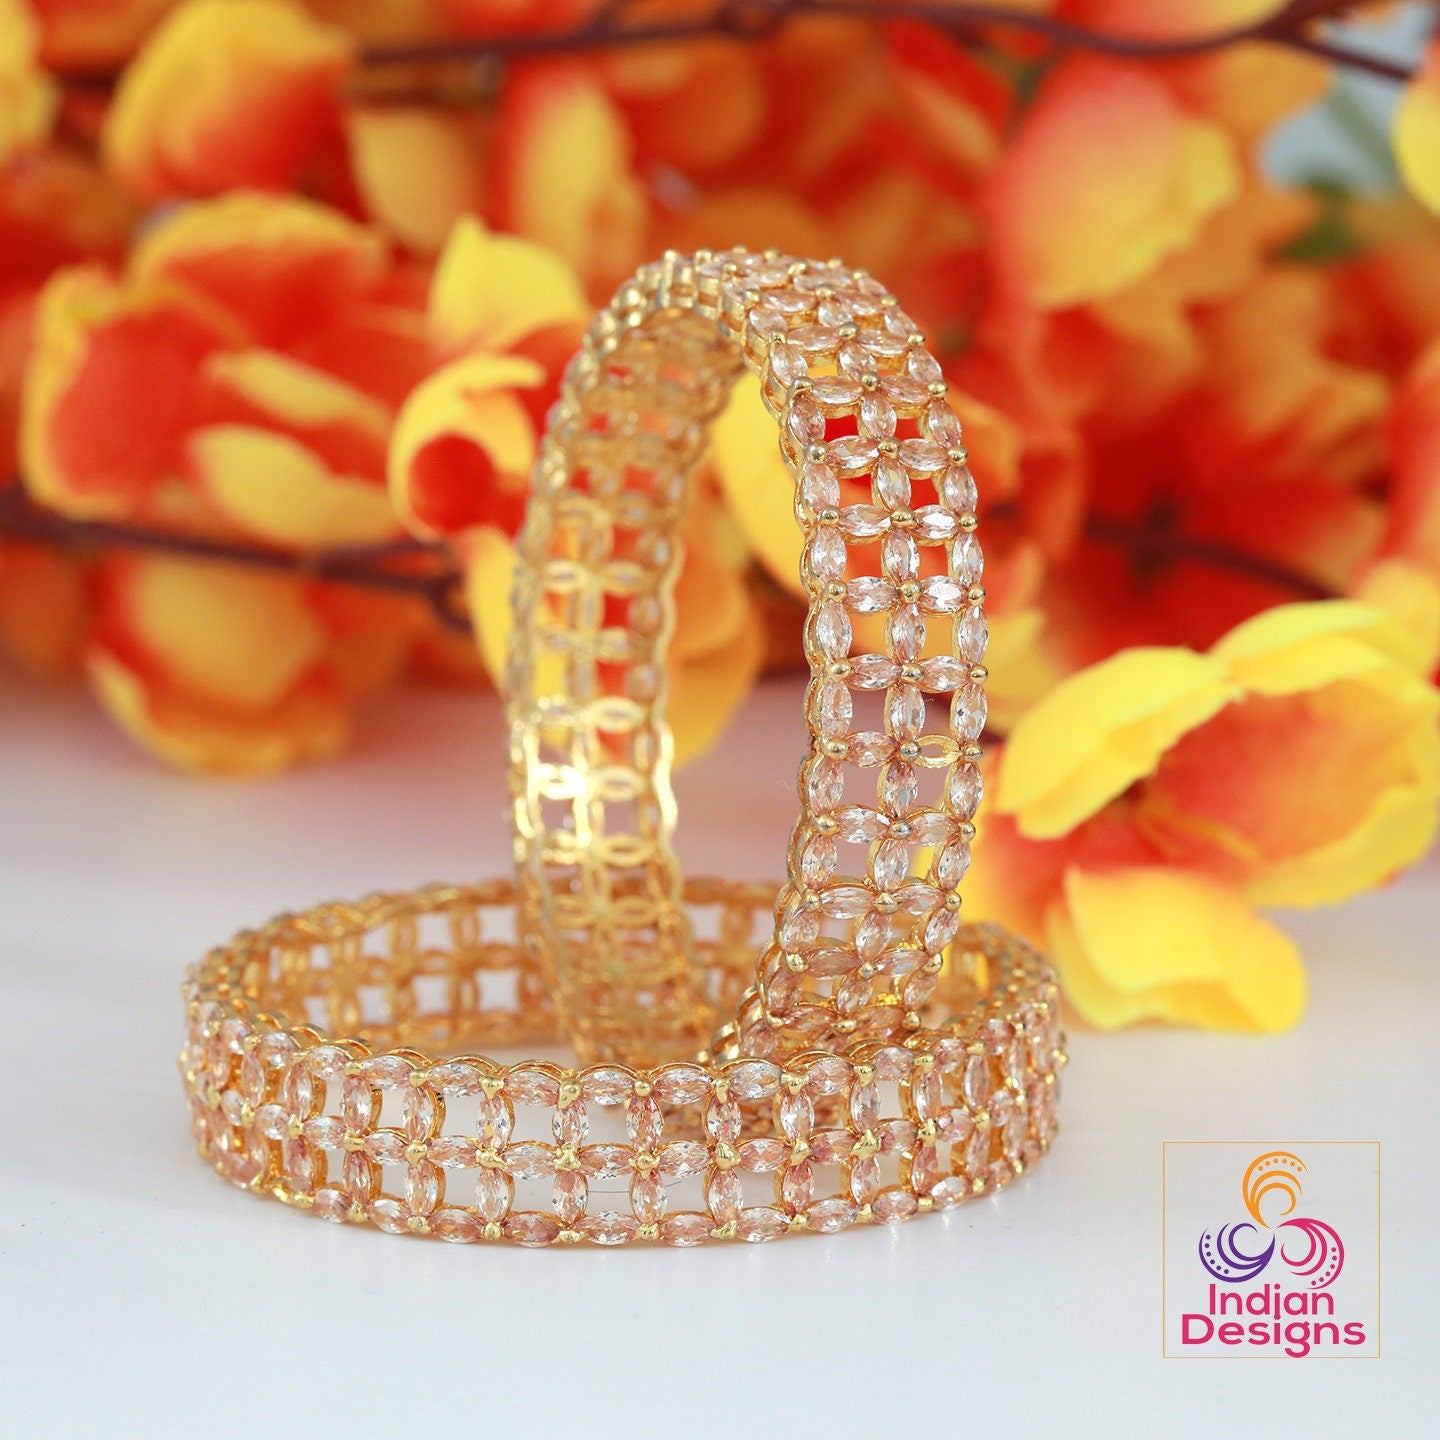 Gold plated Topaz stone Bangles | Floral Design American diamond bracelet and bangles | pair of Bollywood style Bangles from Indian Designs